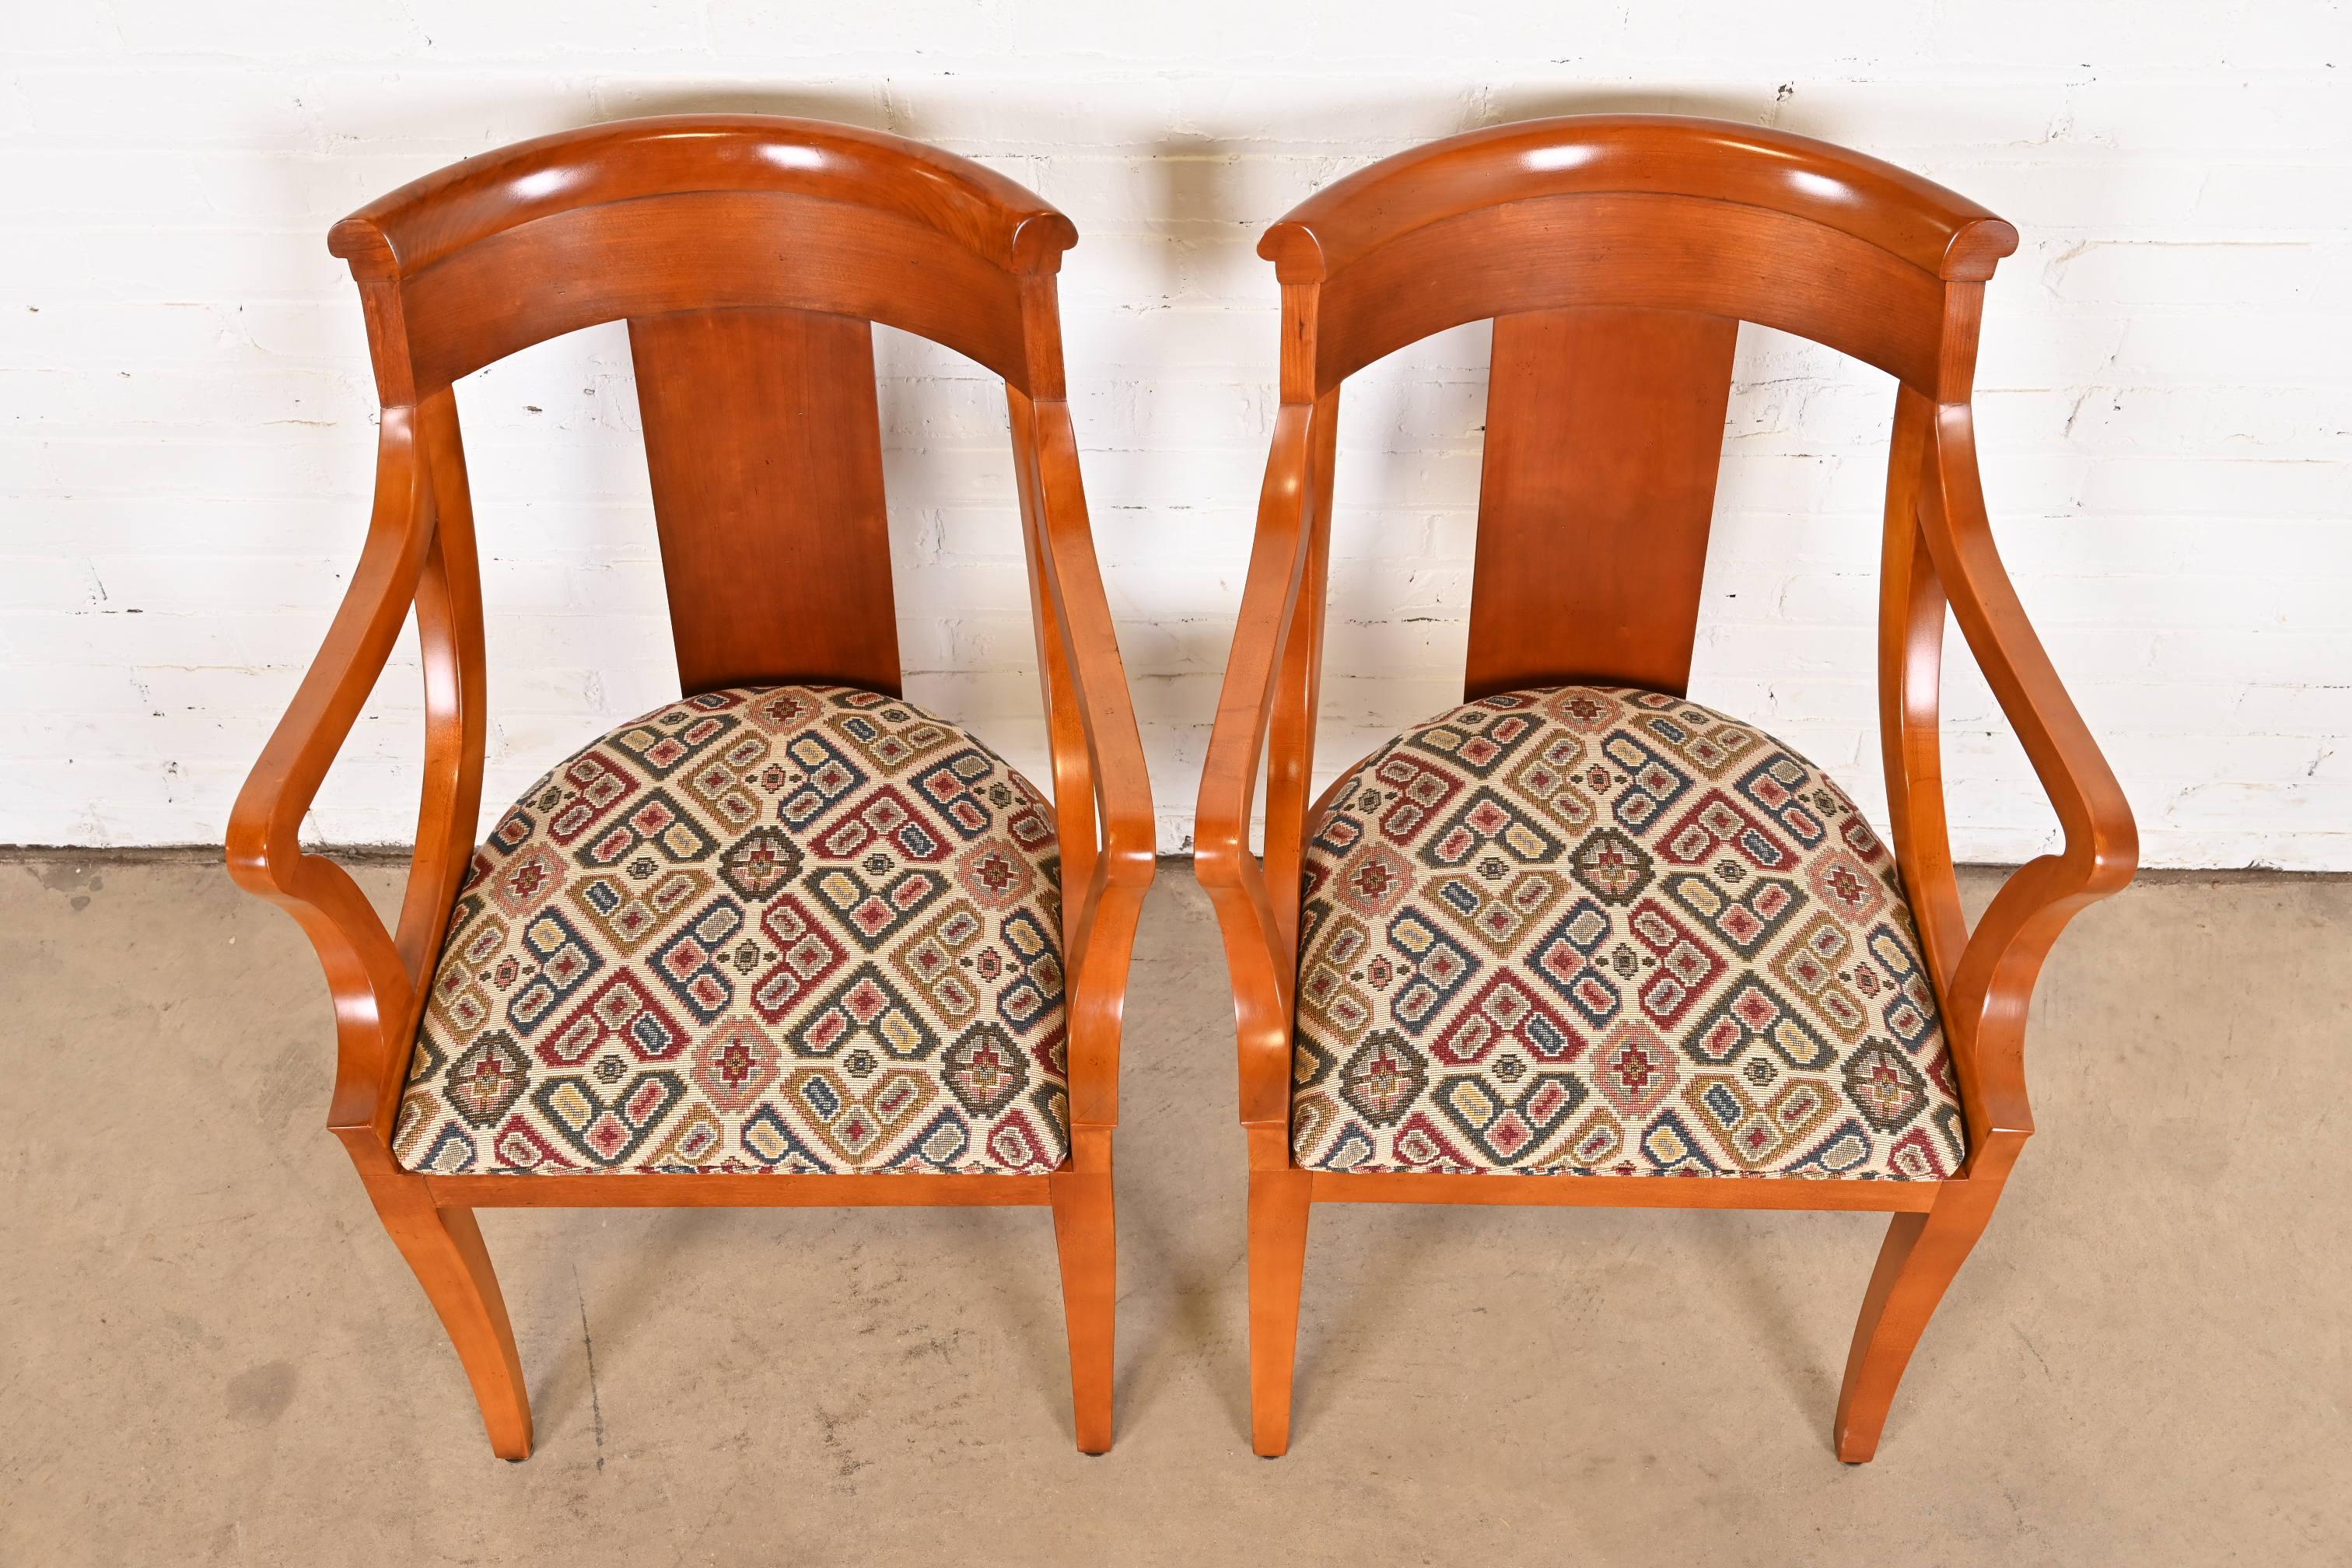 Upholstery Baker Furniture Regency Solid Cherry Wood Arm Chairs, Pair For Sale